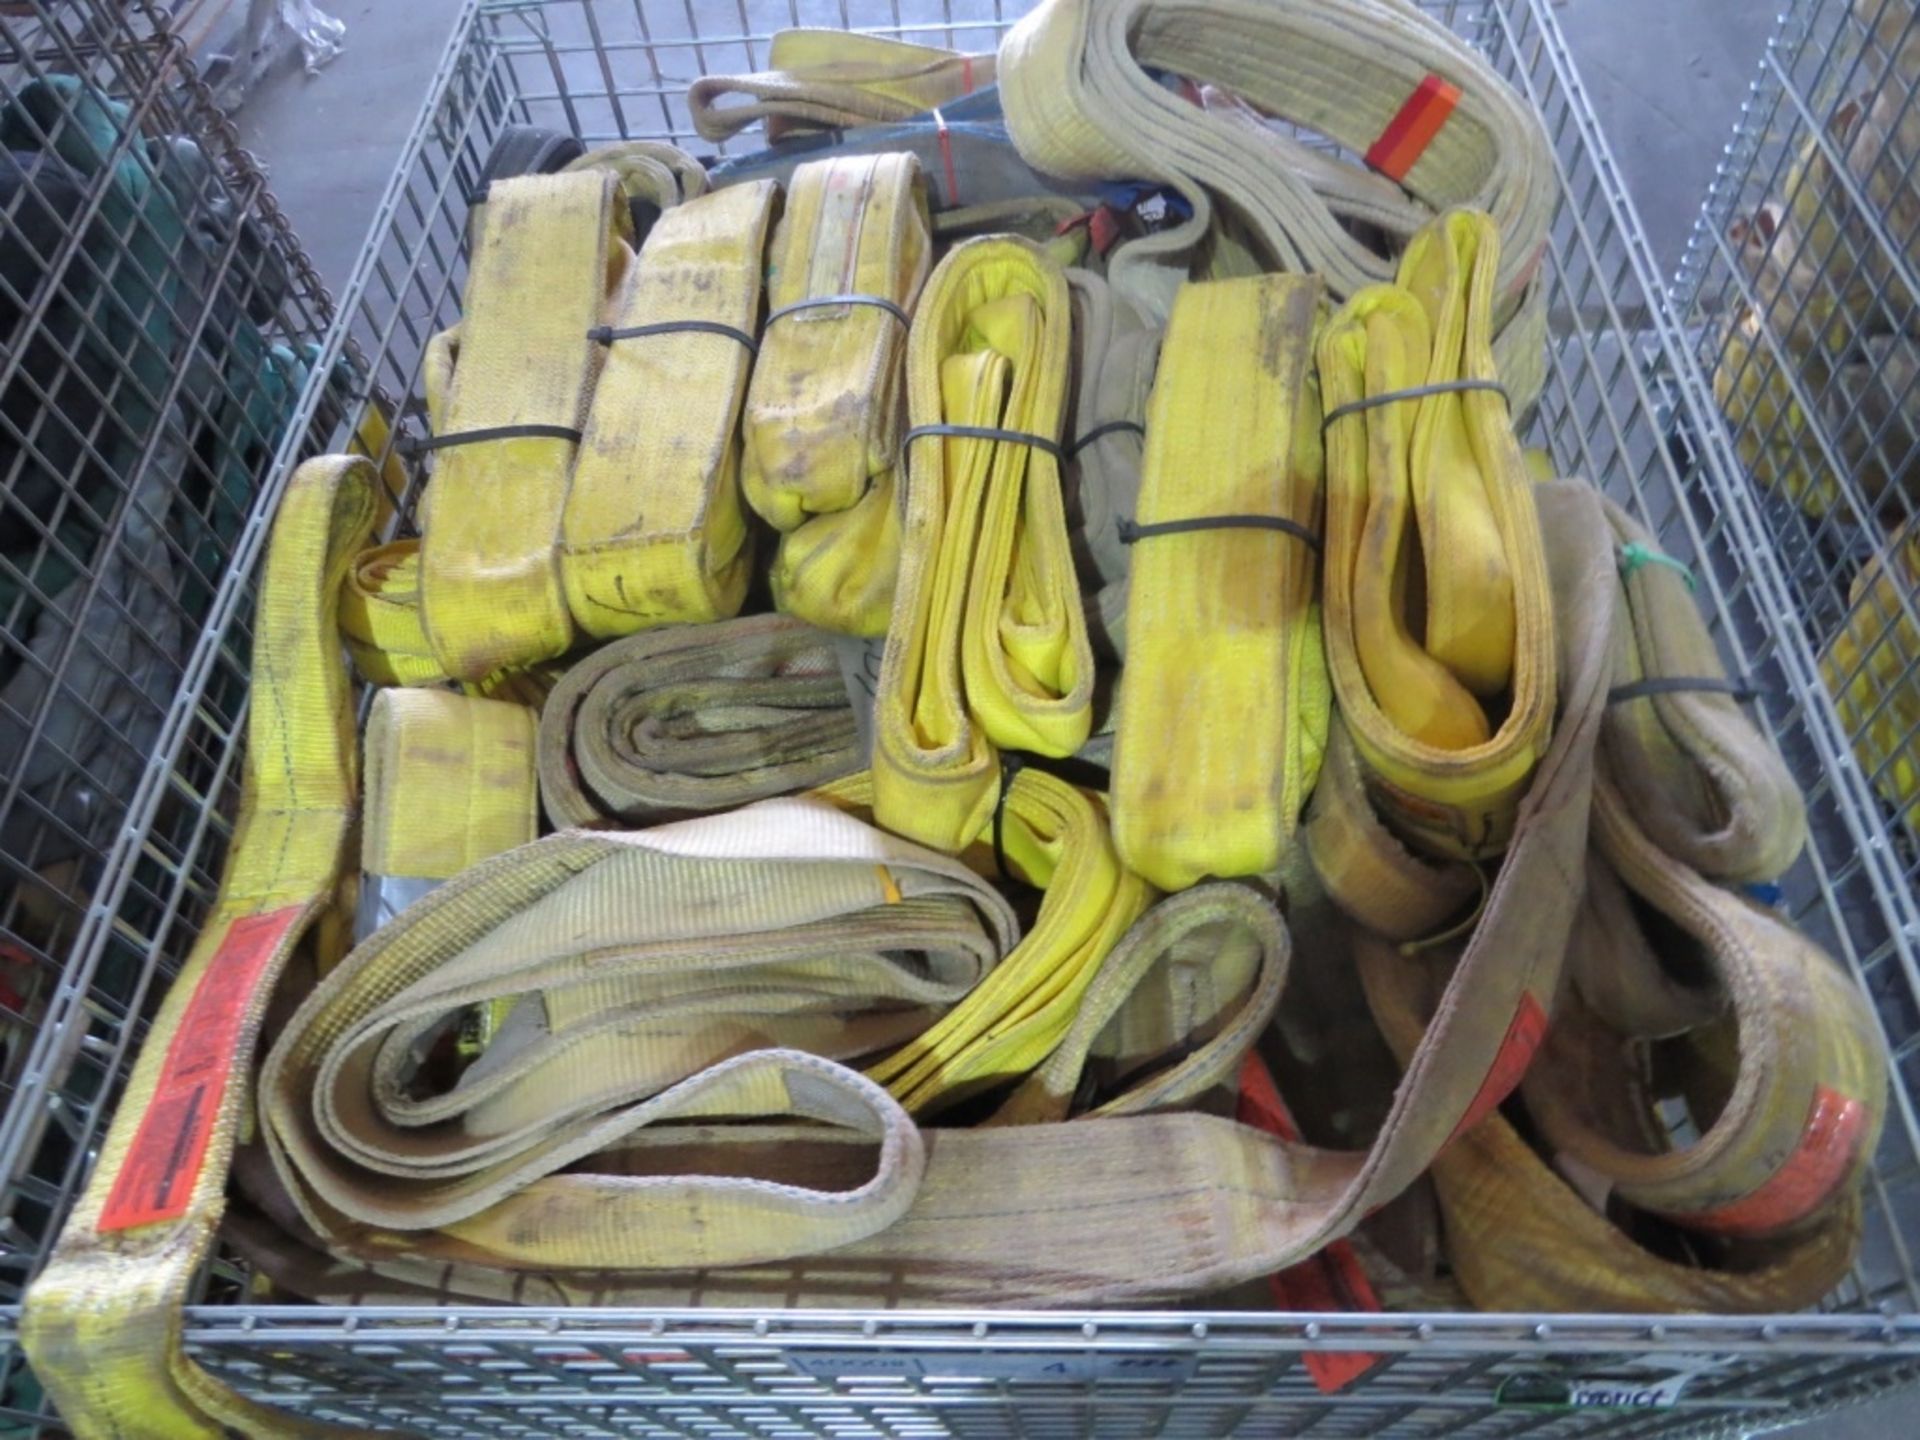 Assorted Nylon Lifting Slings- MFR - Liftall, QC21 Lengths Range From 4' to 10' 4" Wide **Basket